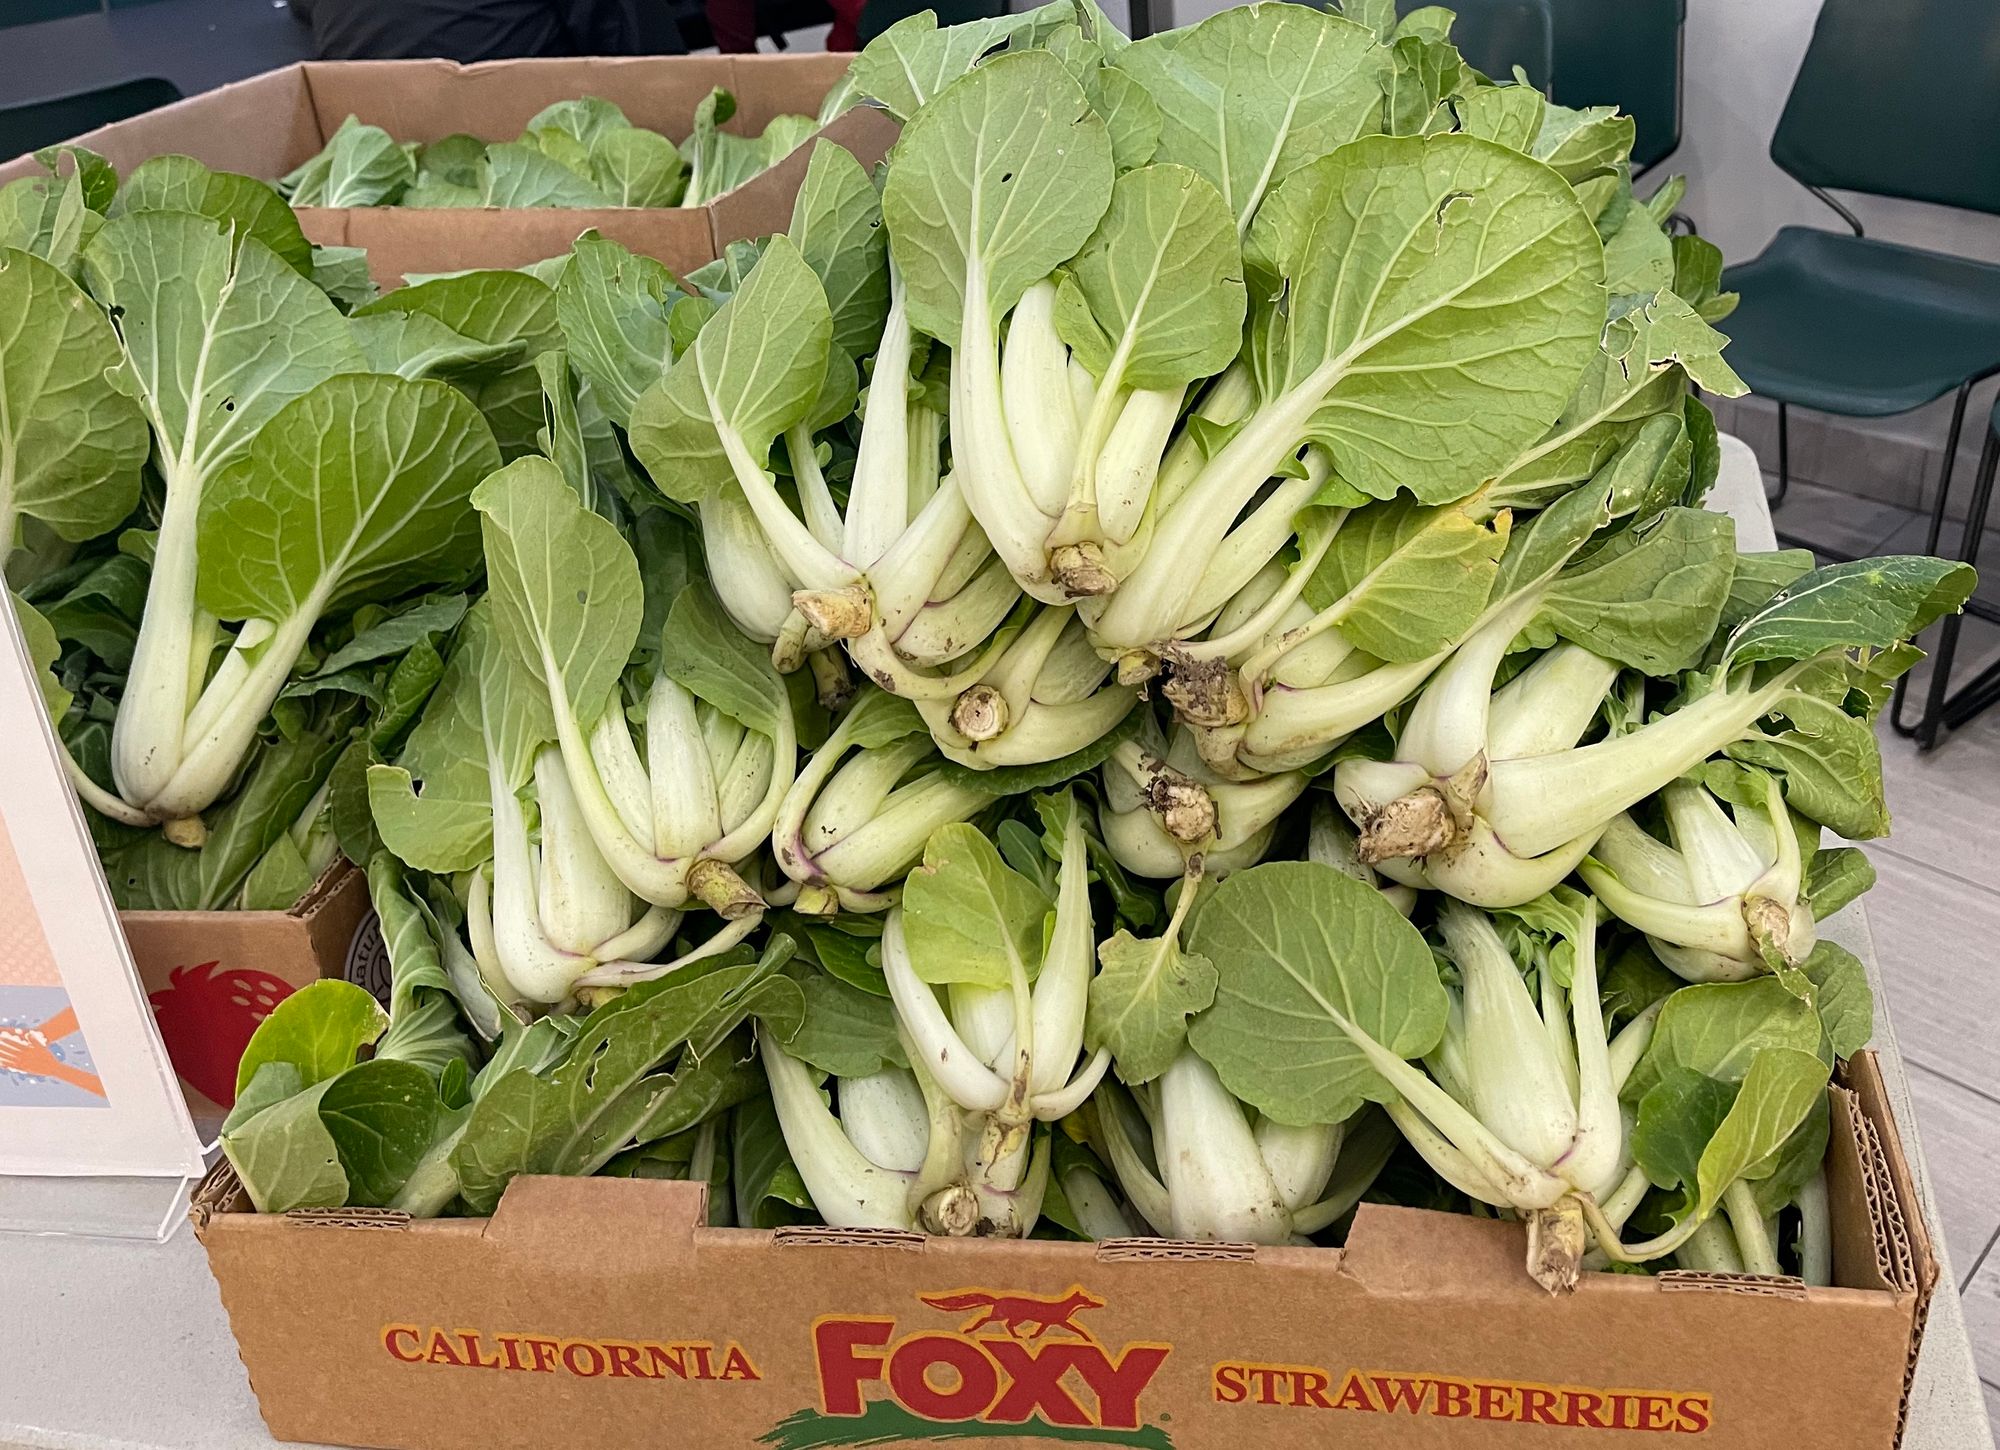 Several boxes overflowing with bok choi freshly harvested from the garden